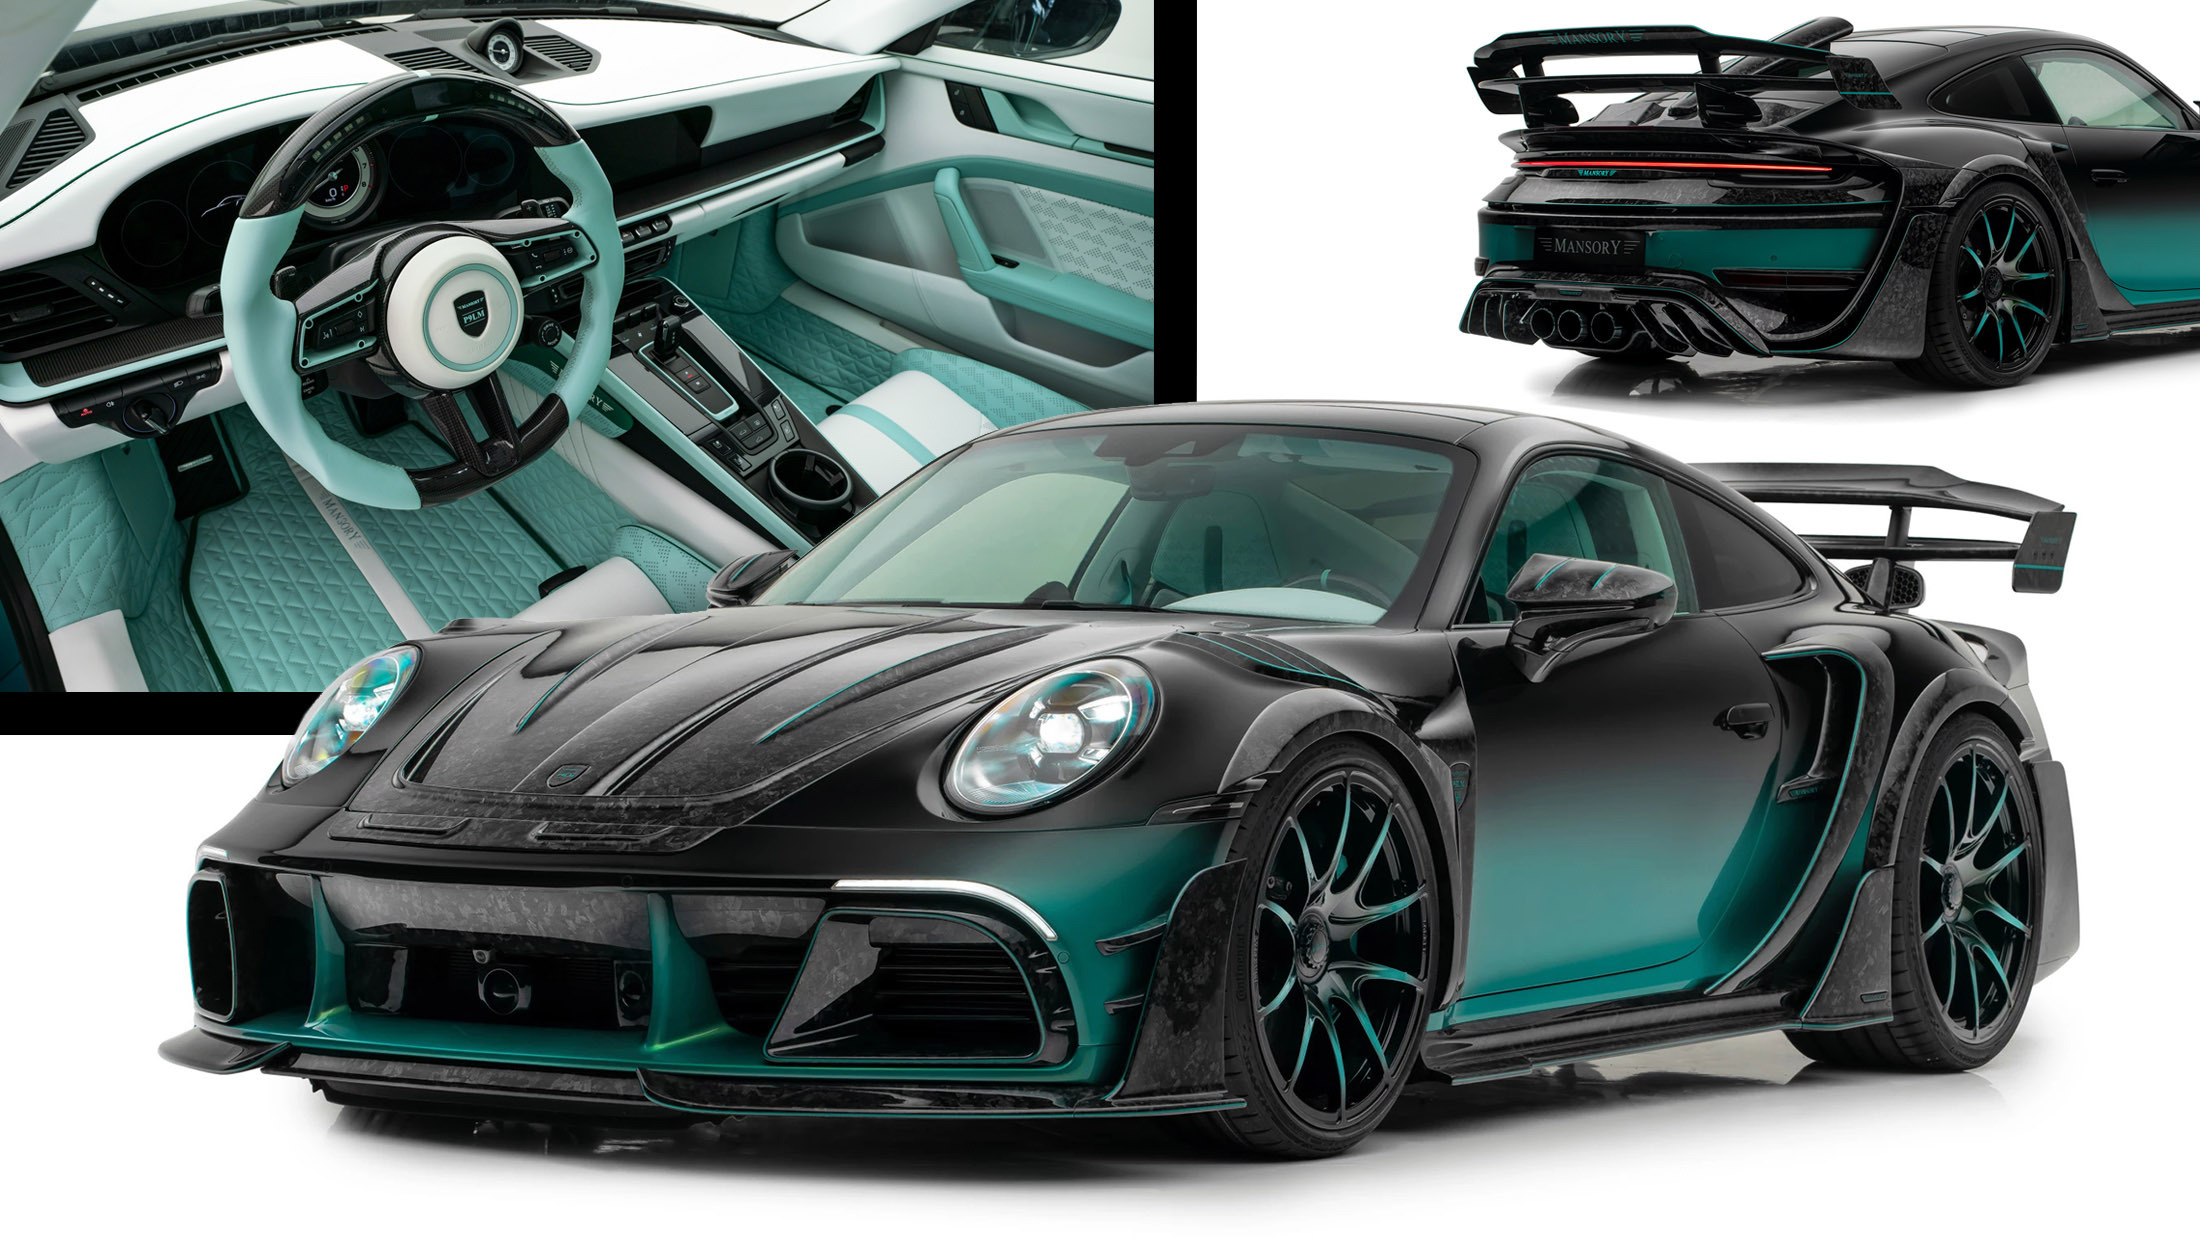 Mansory's Wild Porsche 911 Turbo S Has 900 HP And Forged Carbon Armor